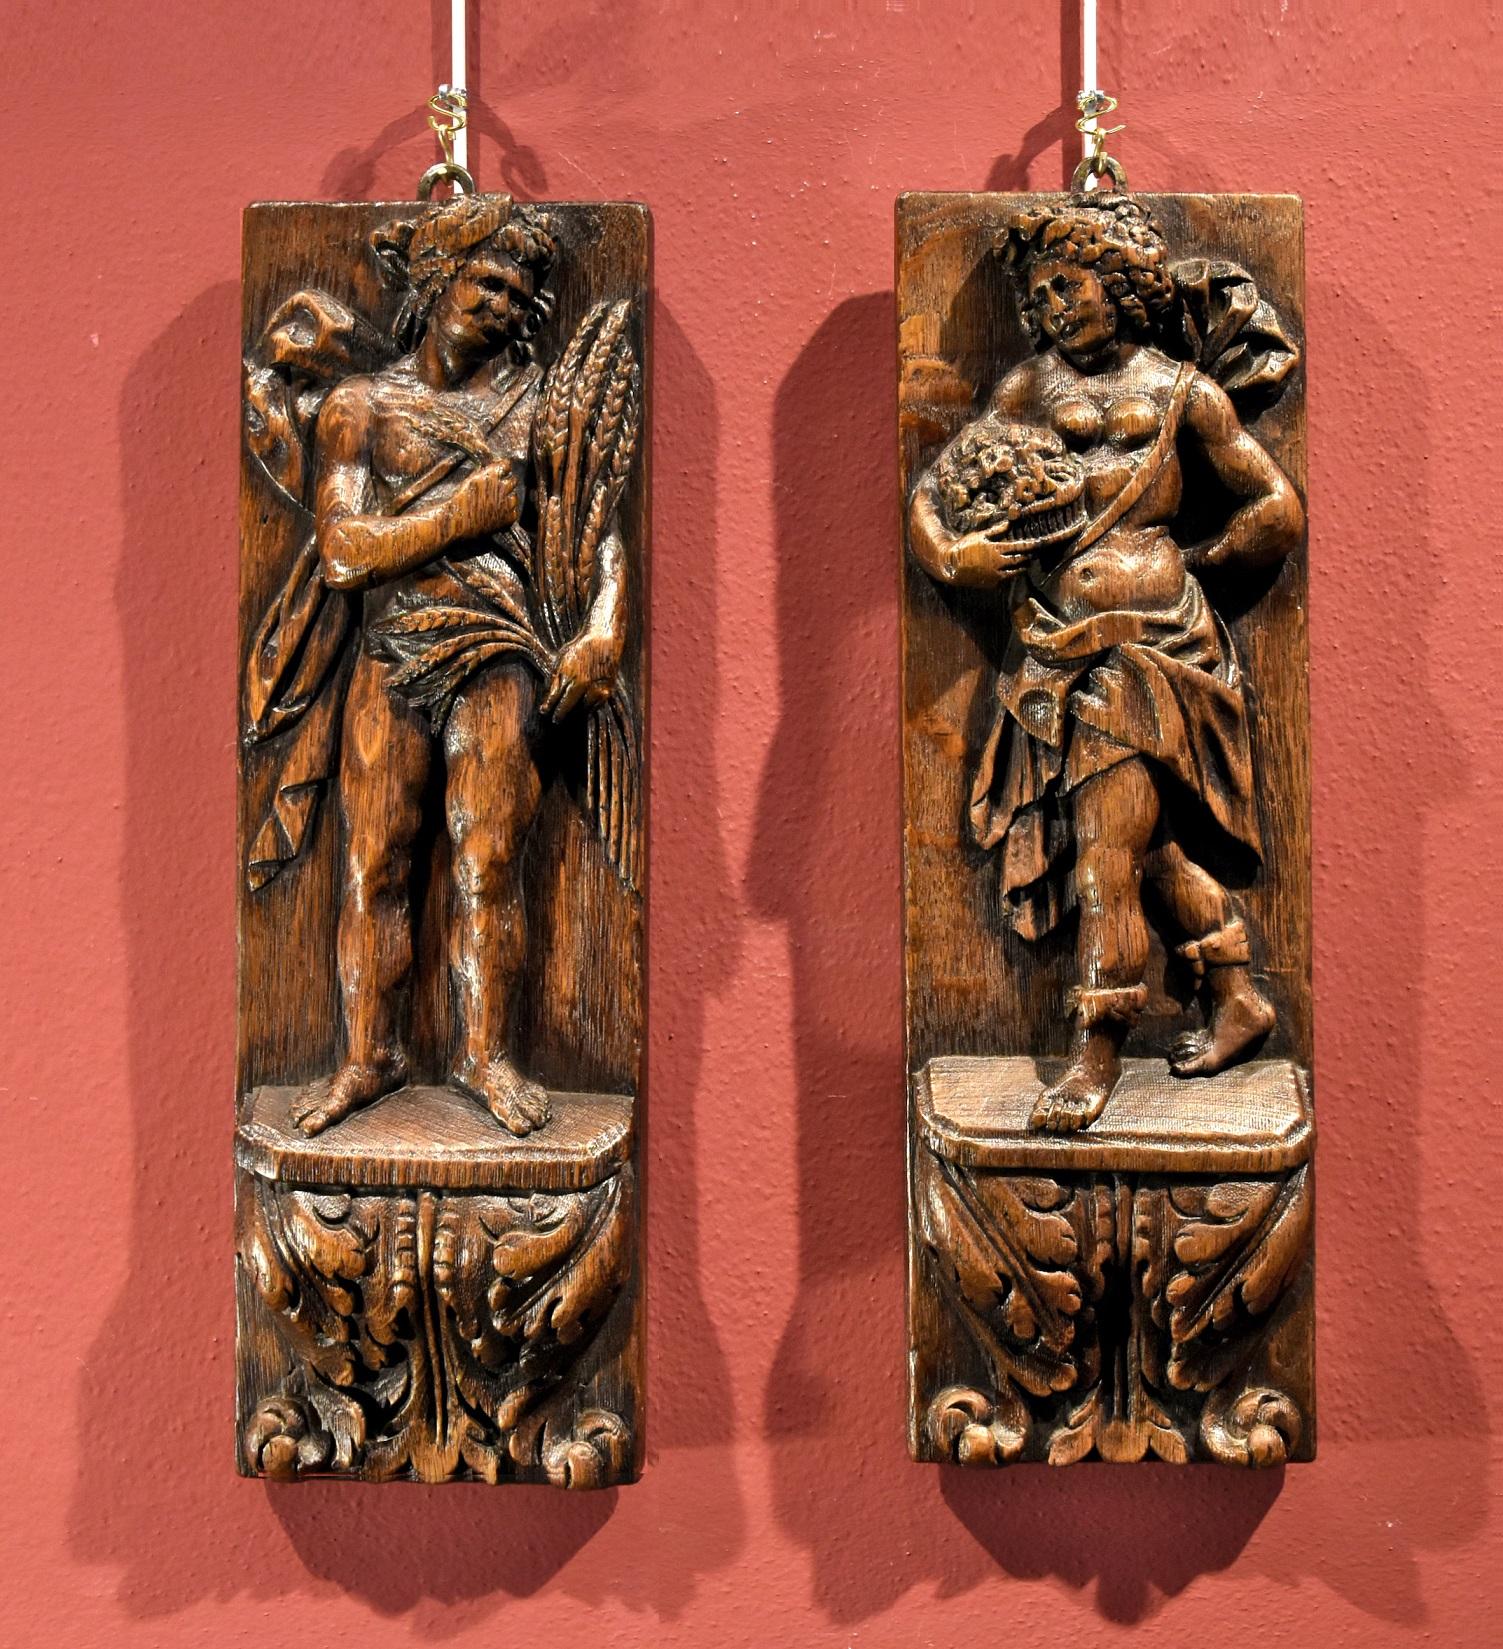 Pair Bas-reliefs Spring Autumn Flemish Sculptor 17th Century Wood   - Sculpture by Flemish sculptor of the 17th century